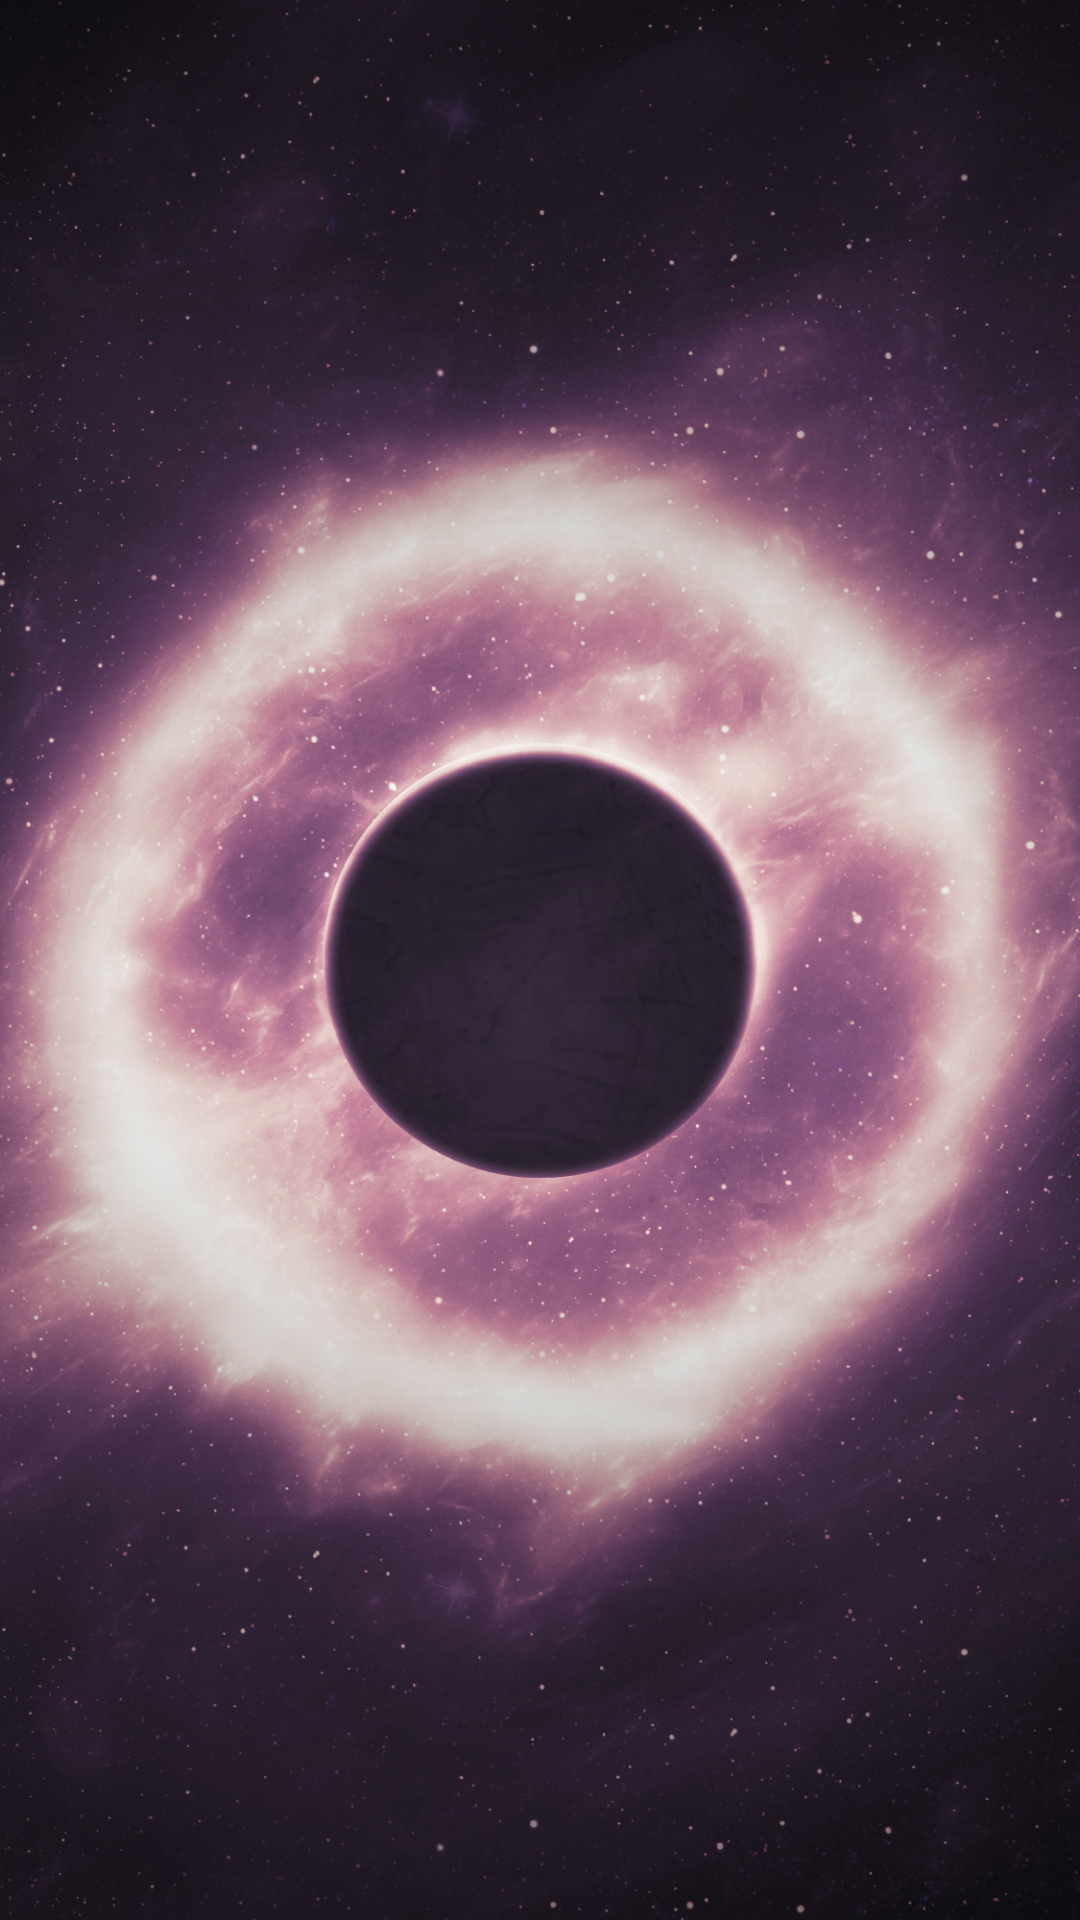 750+ Black Hole Pictures [HD] | Download Free Images on Unsplash